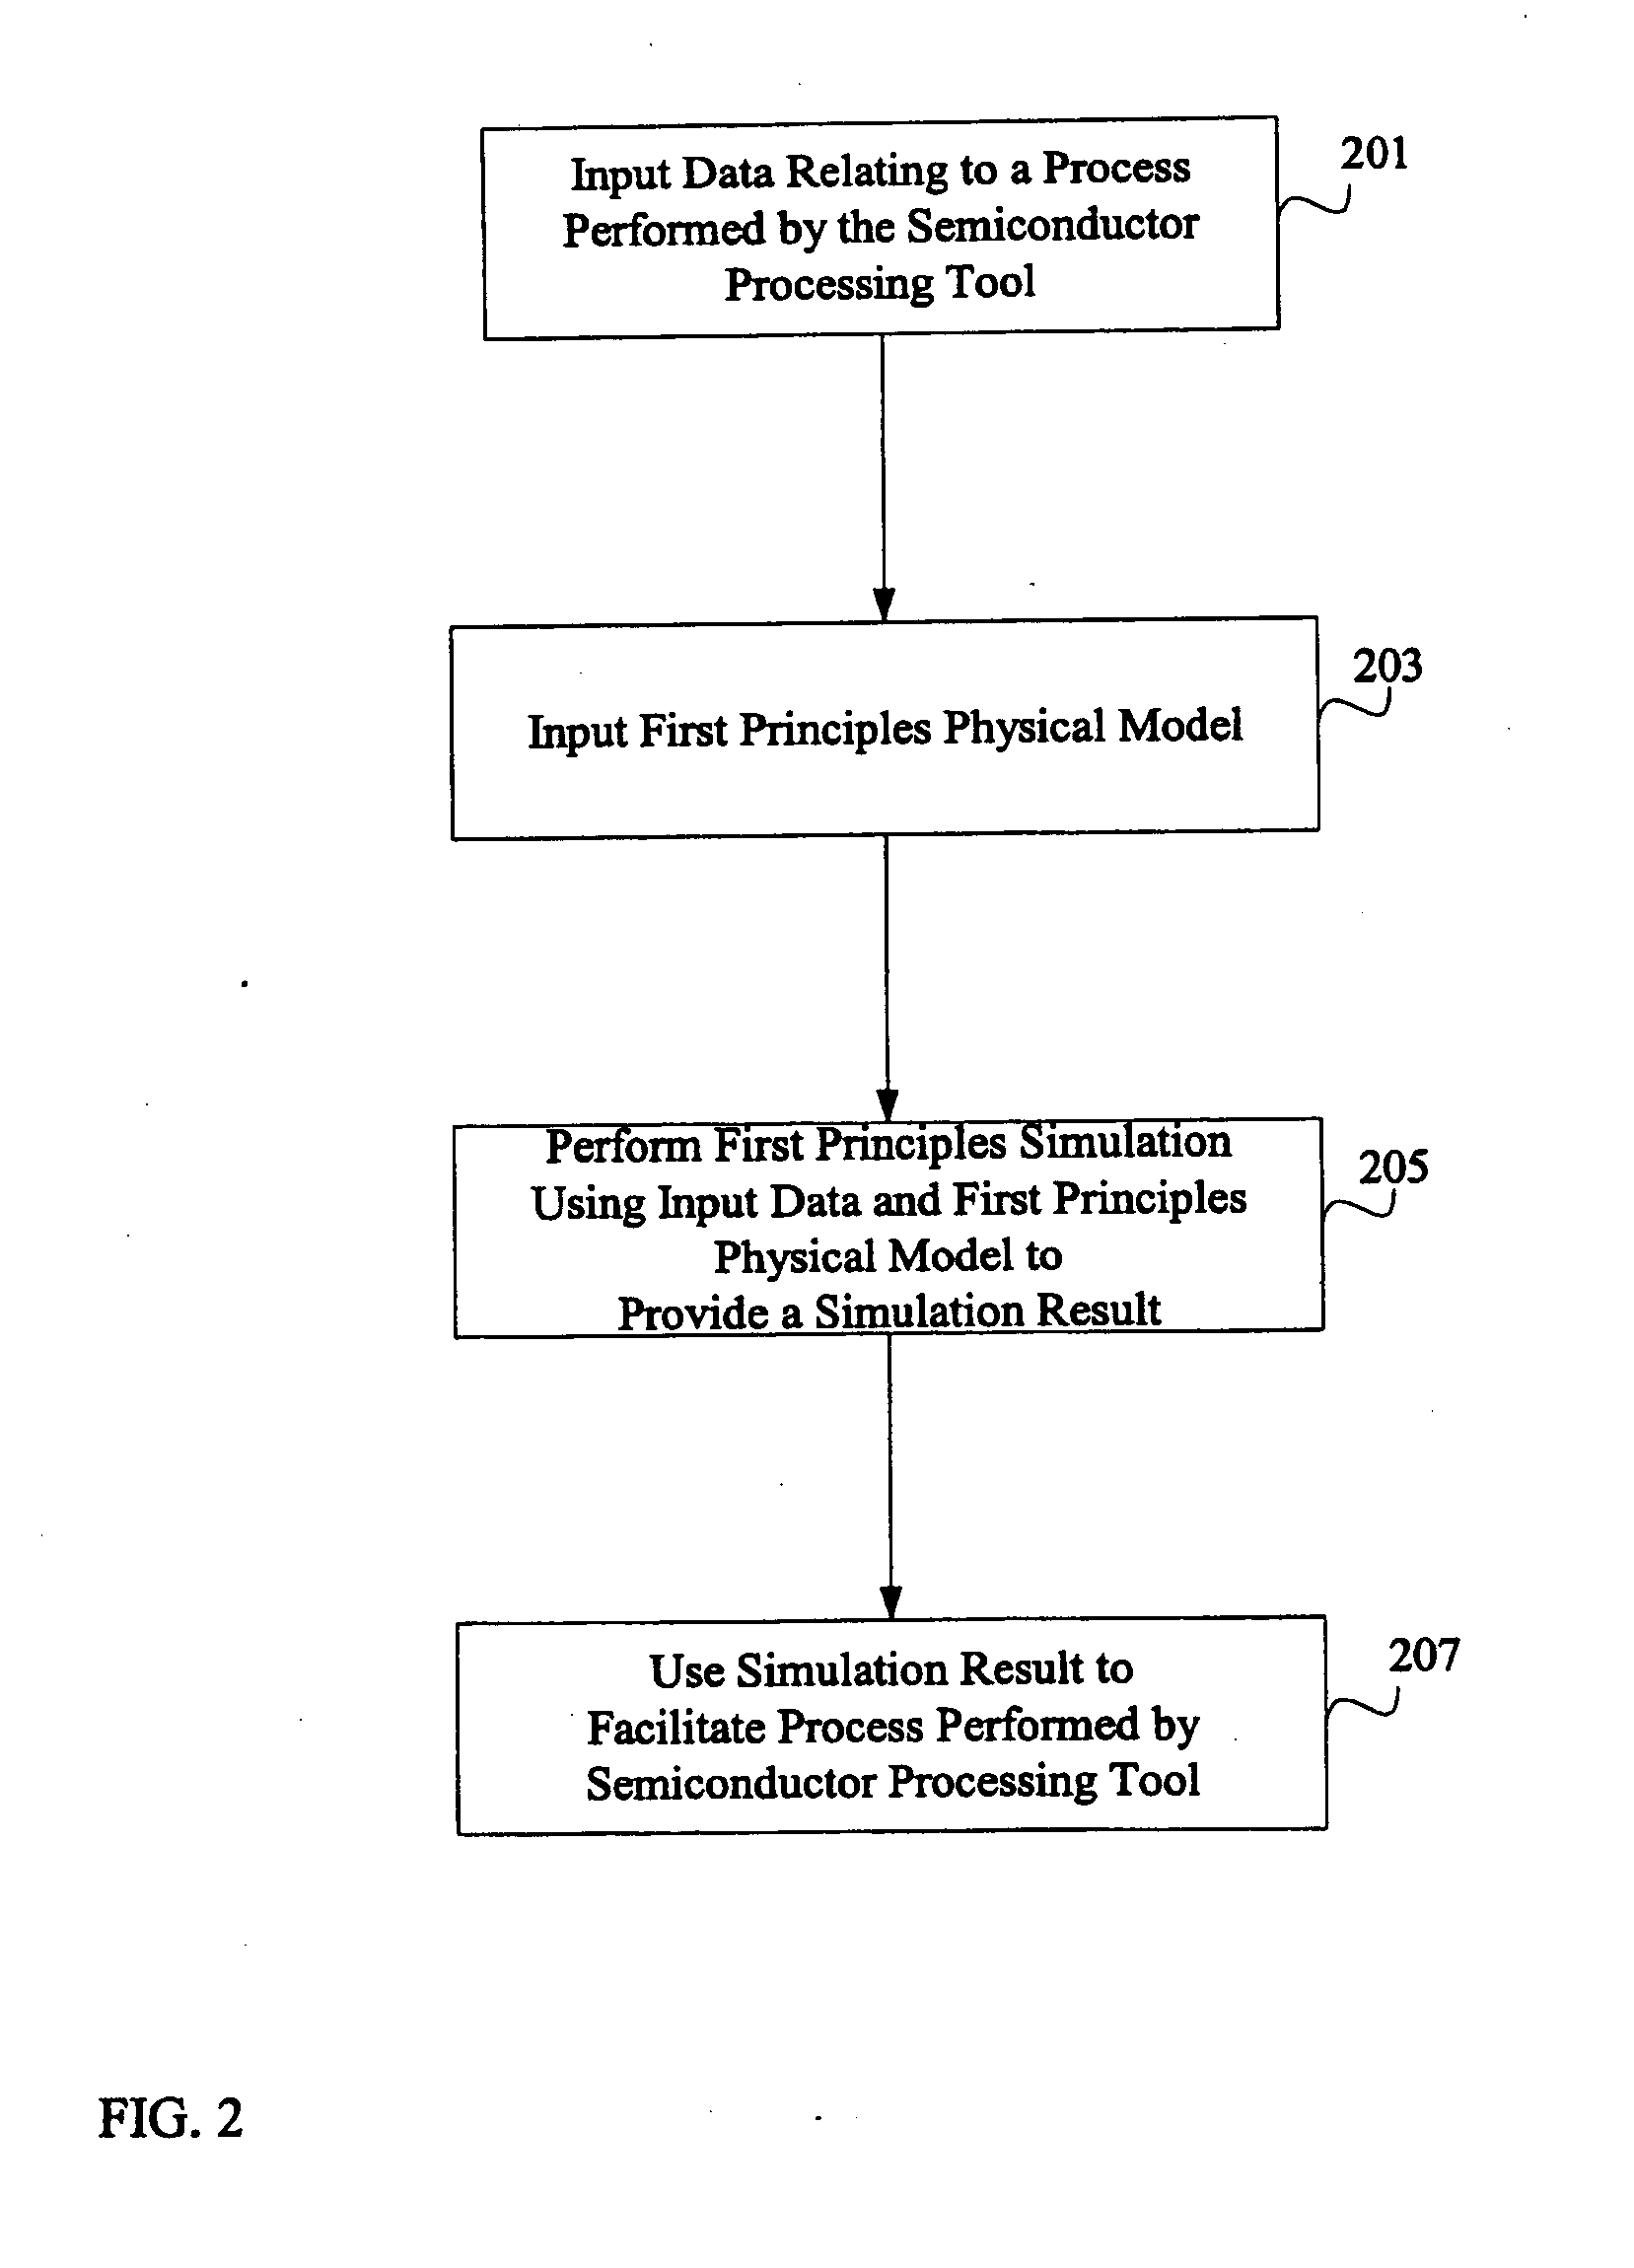 System and method for using first-principles simulation to facilitate a semiconductor manufacturing process